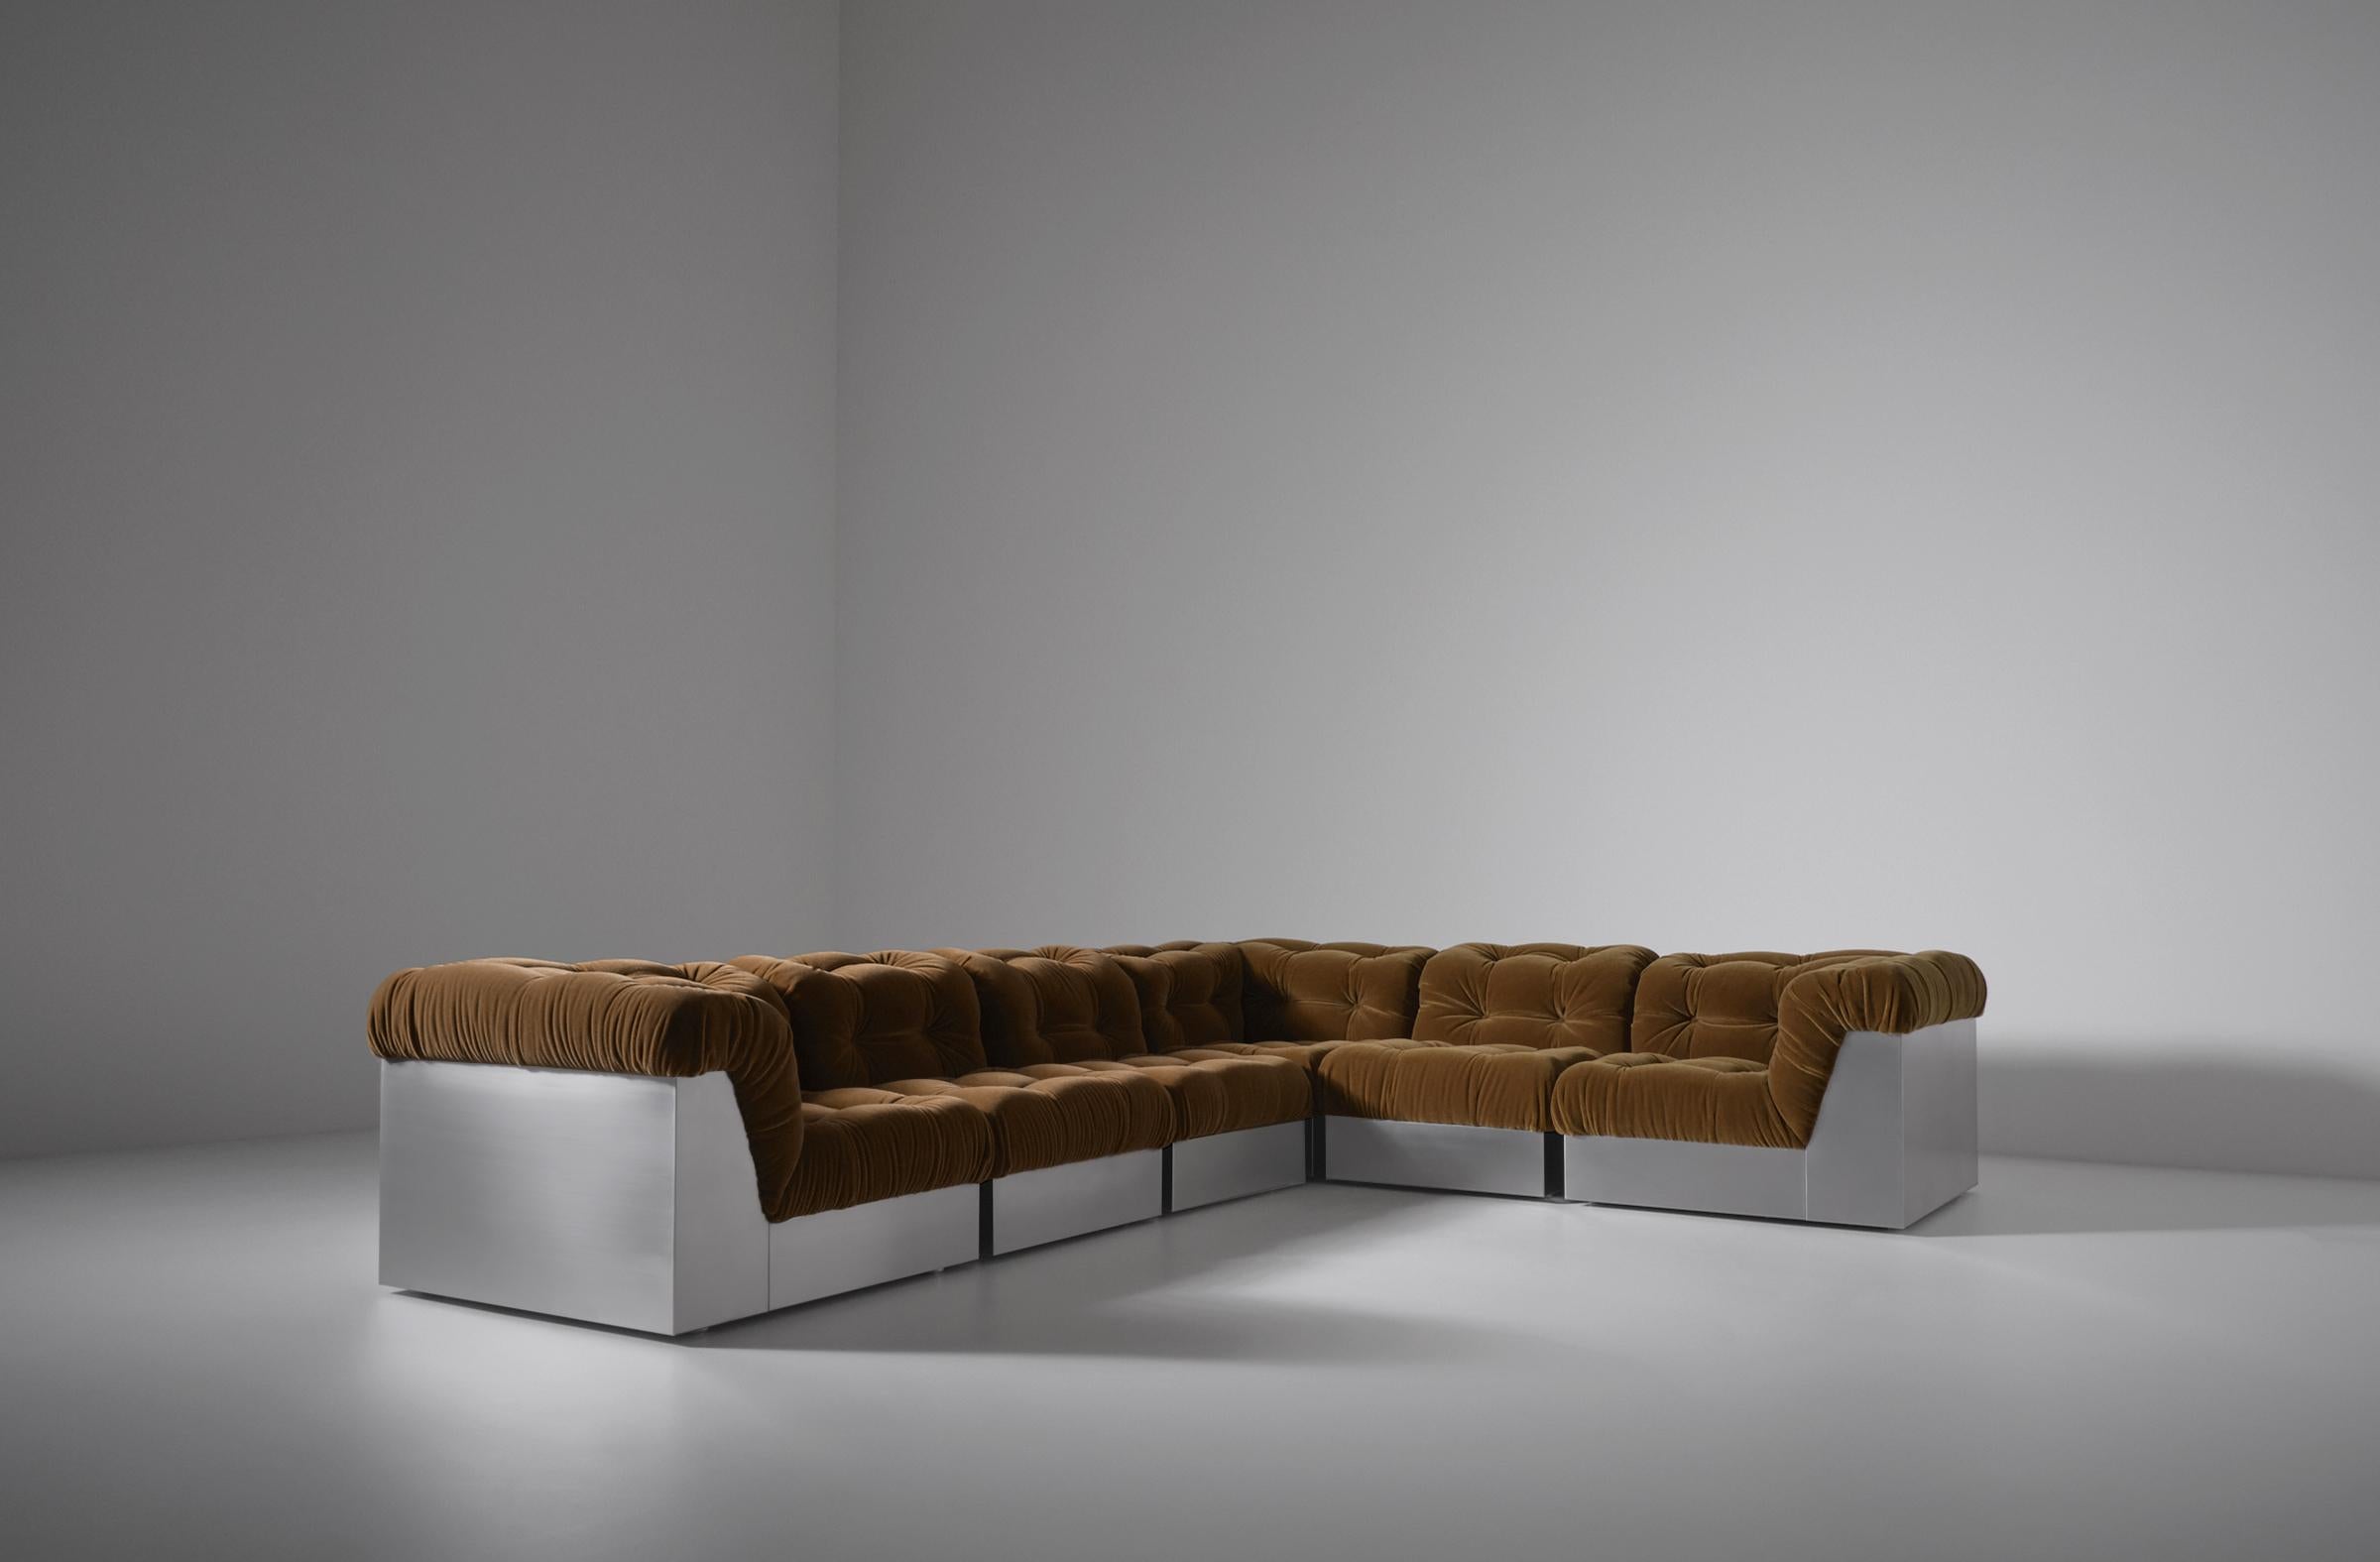 Large modular sofa by Giorgio Montani for Souplina, France 1970s. Stunning outspoken stainless steel structure and mohair velvet upholstery. Very intriguing contrast between the ultra modern and hard 'outer shel'l and the traditional soft padded